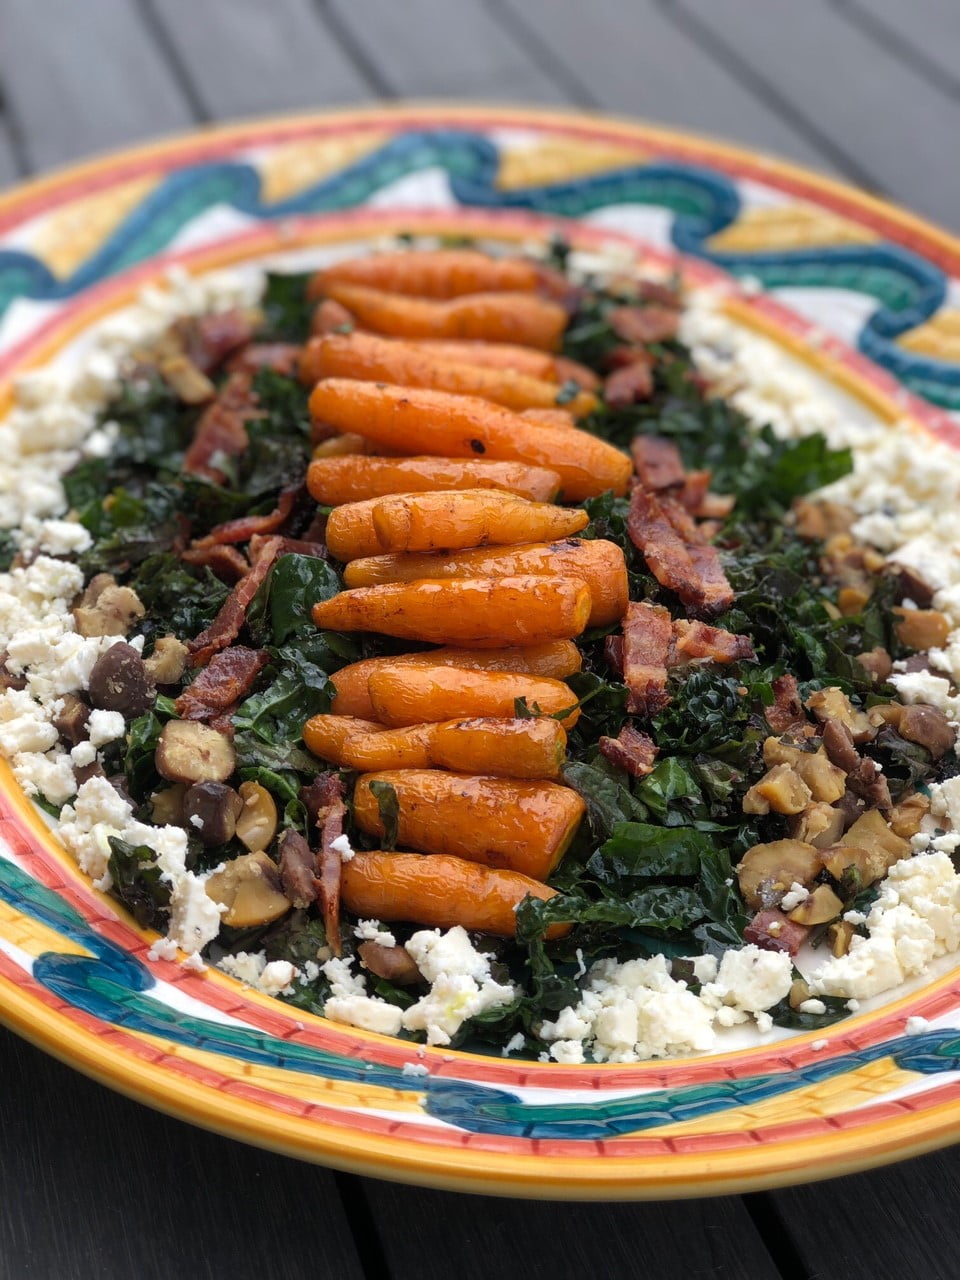 Honey Glazed Roasted Carrot and Kale Salad with Candied Bacon, Feta and Chestnuts